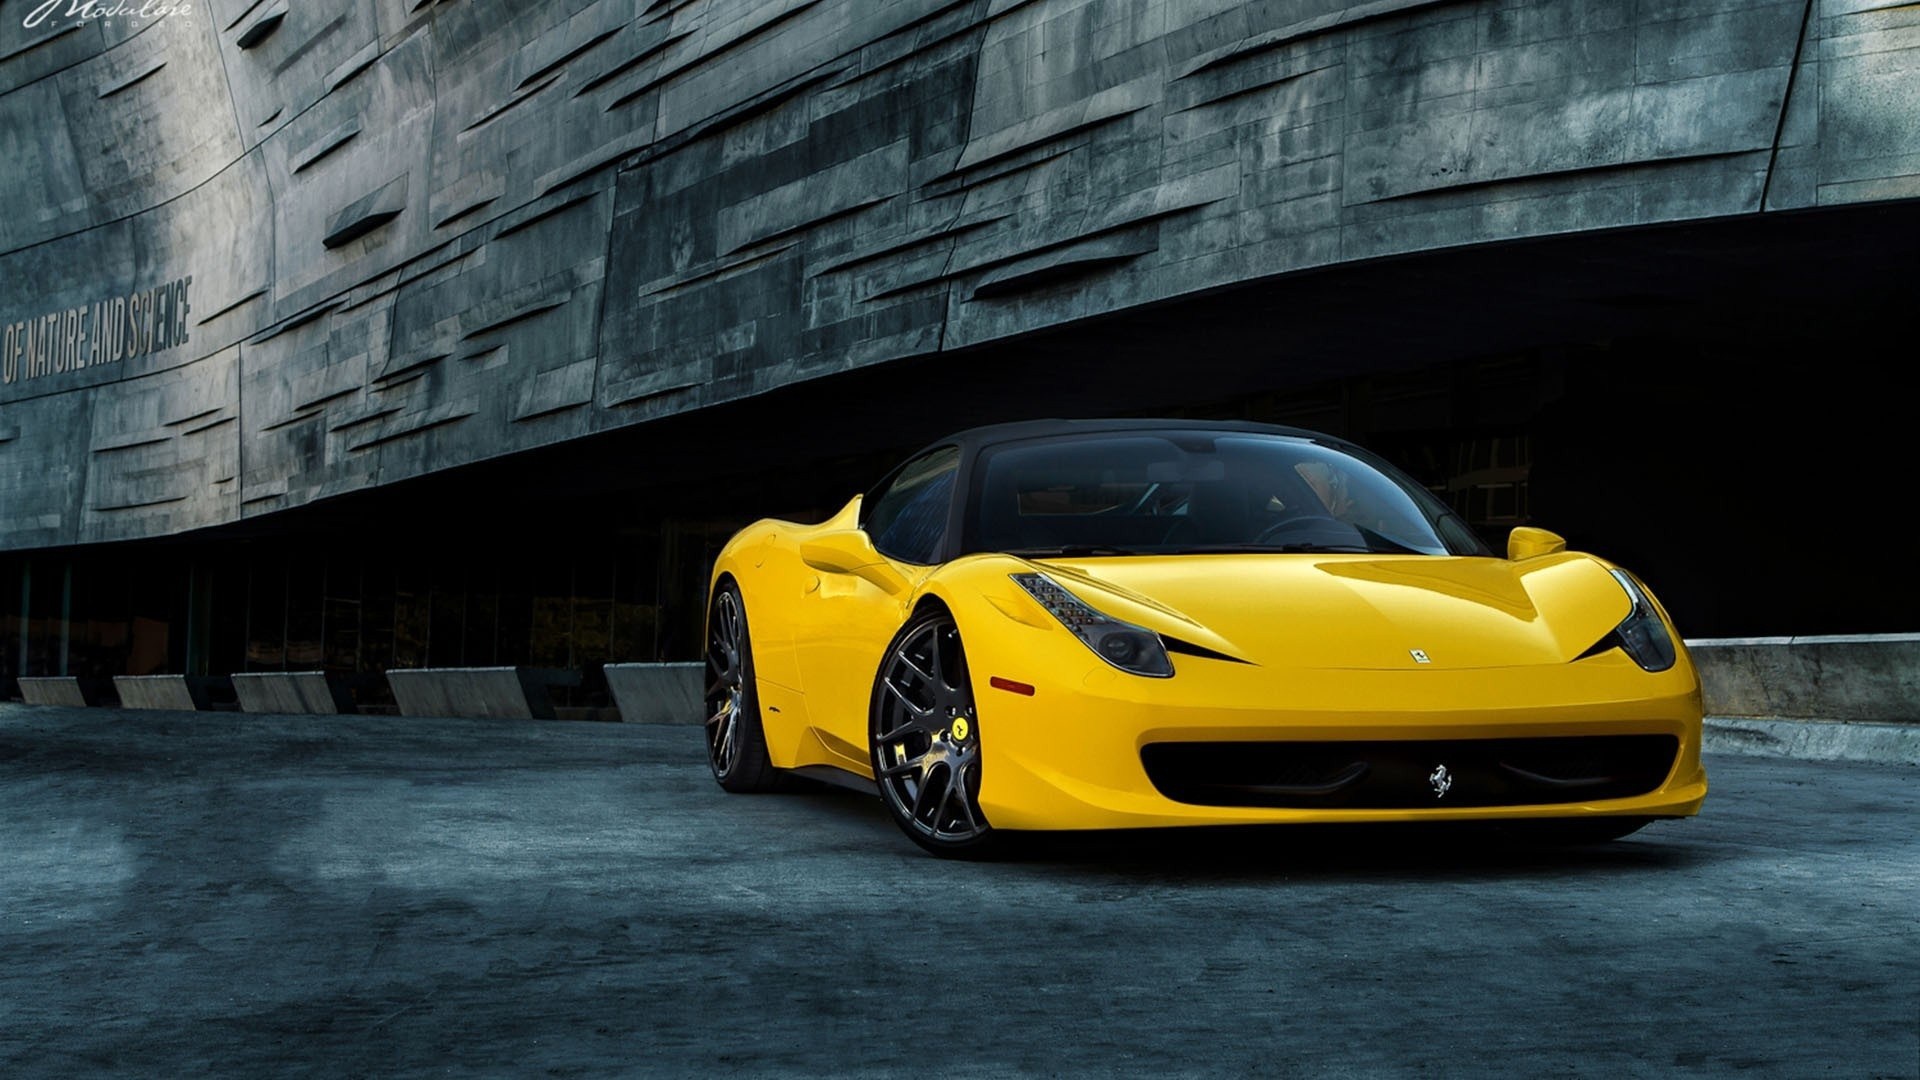 Ferrari Yellow And Black Images amp Pictures   Becuo 1920x1080